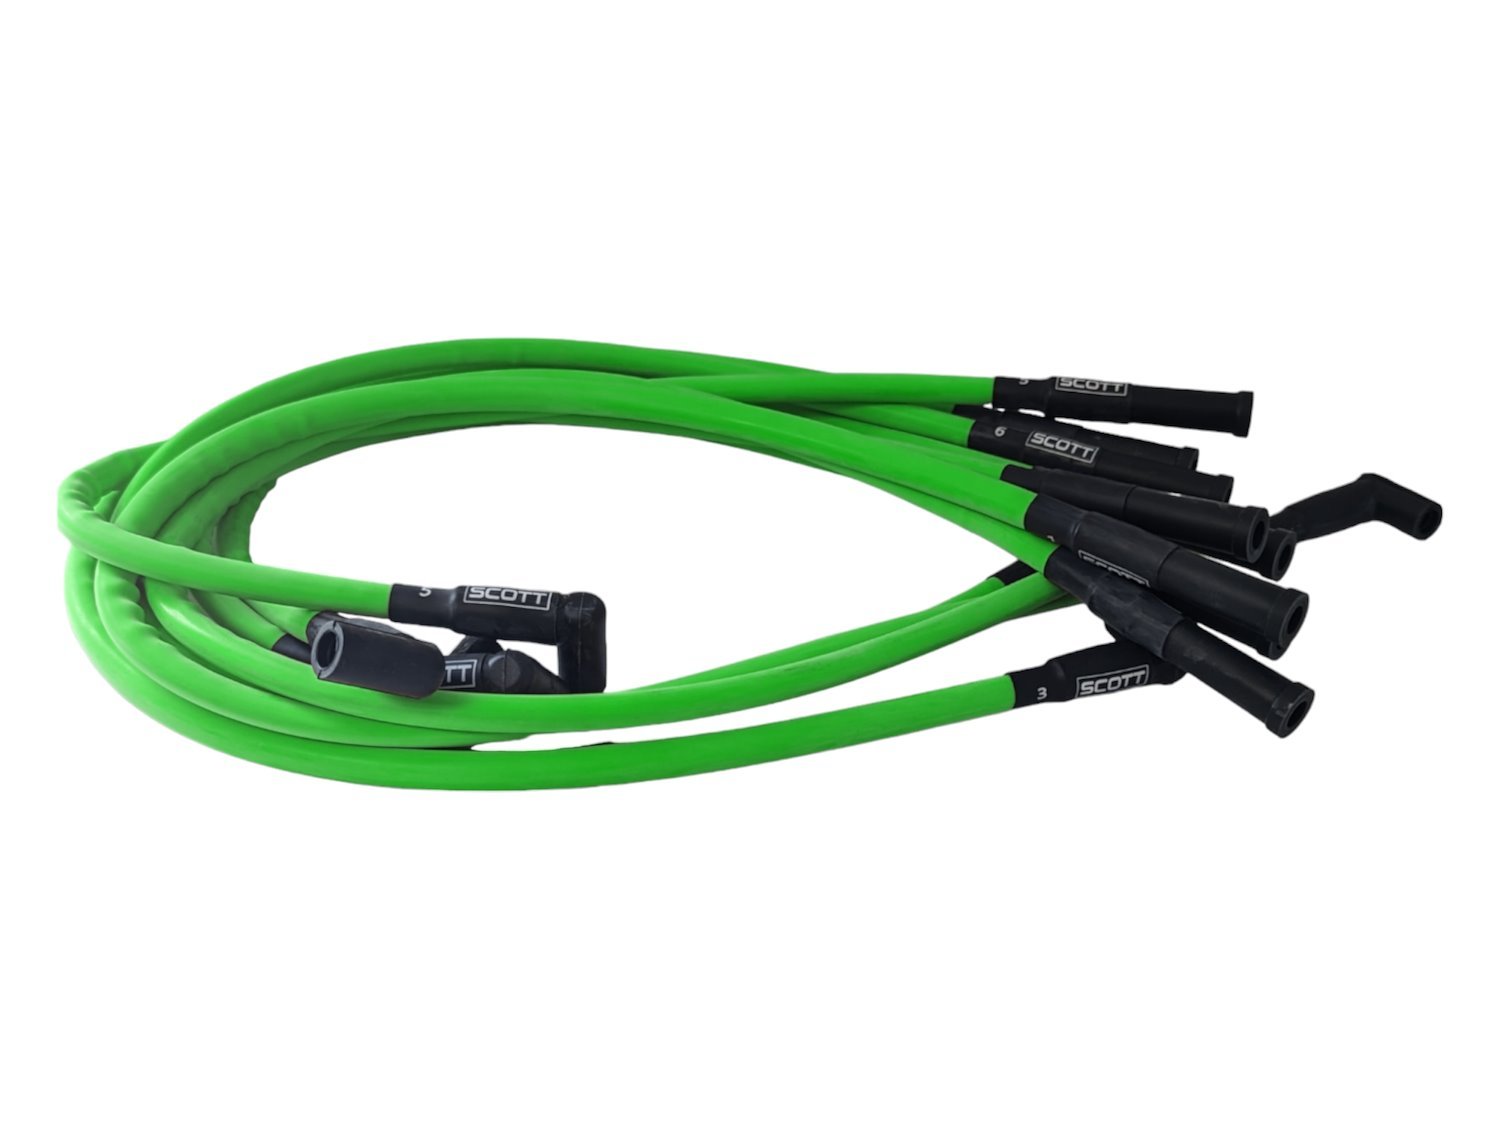 SPW-CH-421-8 High-Performance Silicone-Sleeved Spark Plug Wire Set for Small Block Chevy, Over Valve Cover [Fluorescent Green]